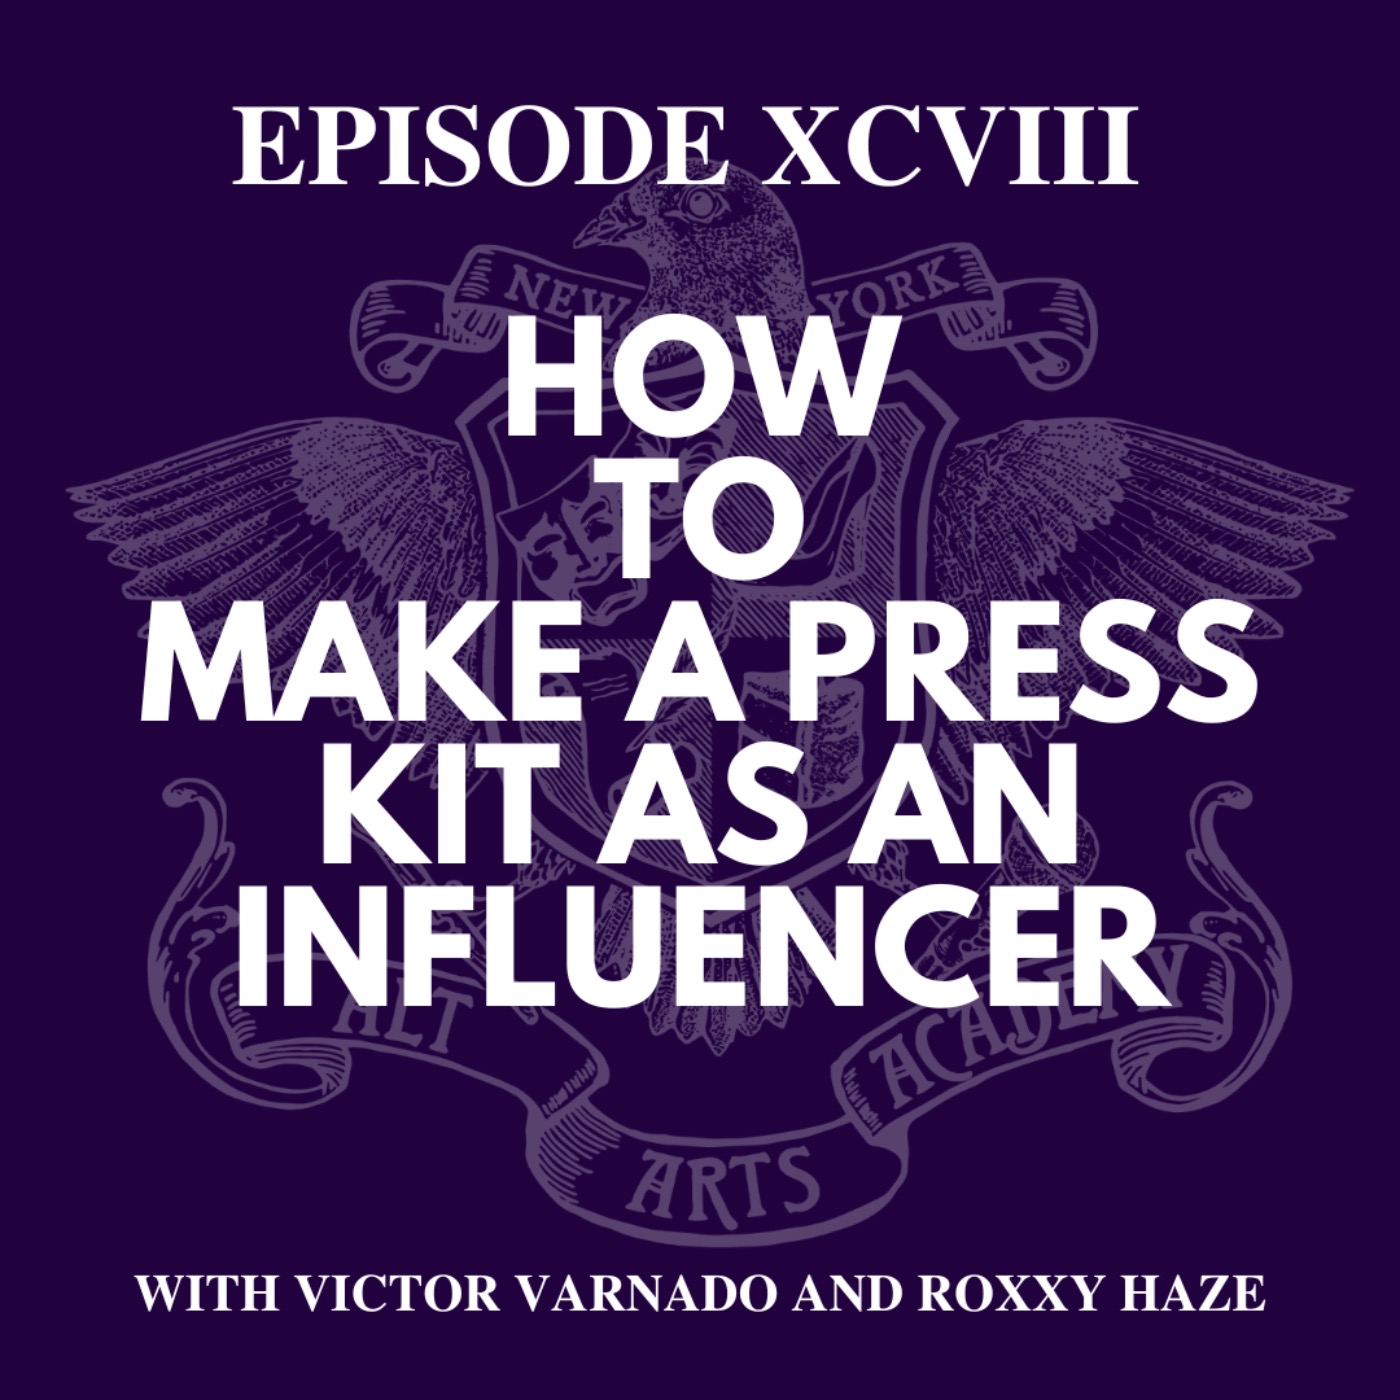 How To Make A Press Kit As An Influencer